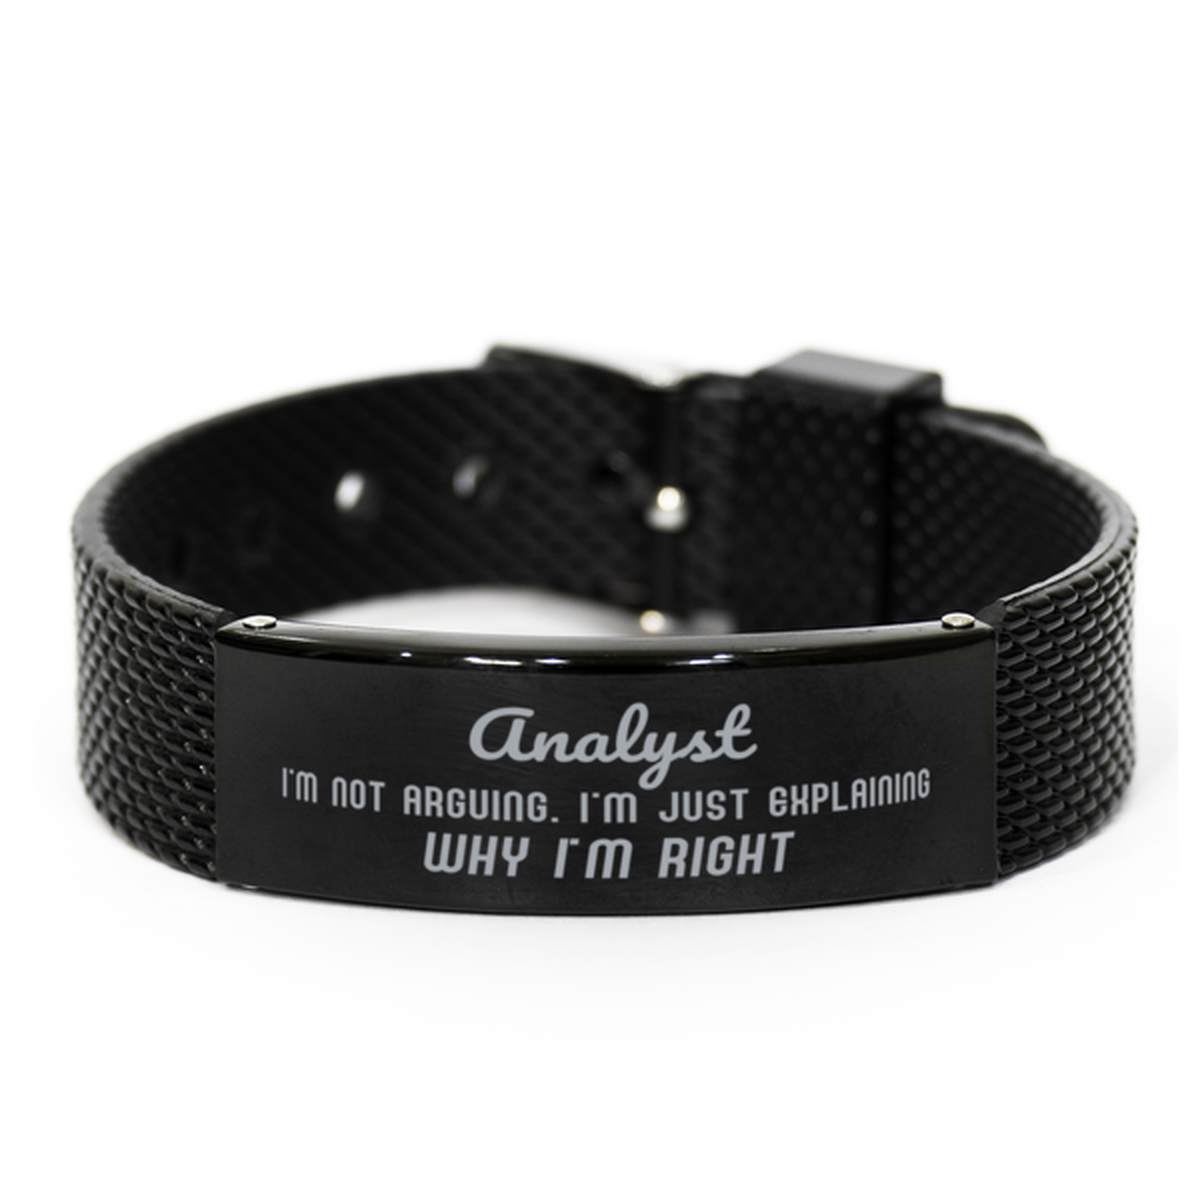 Analyst I'm not Arguing. I'm Just Explaining Why I'm RIGHT Black Shark Mesh Bracelet, Funny Saying Quote Analyst Gifts For Analyst Graduation Birthday Christmas Gifts for Men Women Coworker